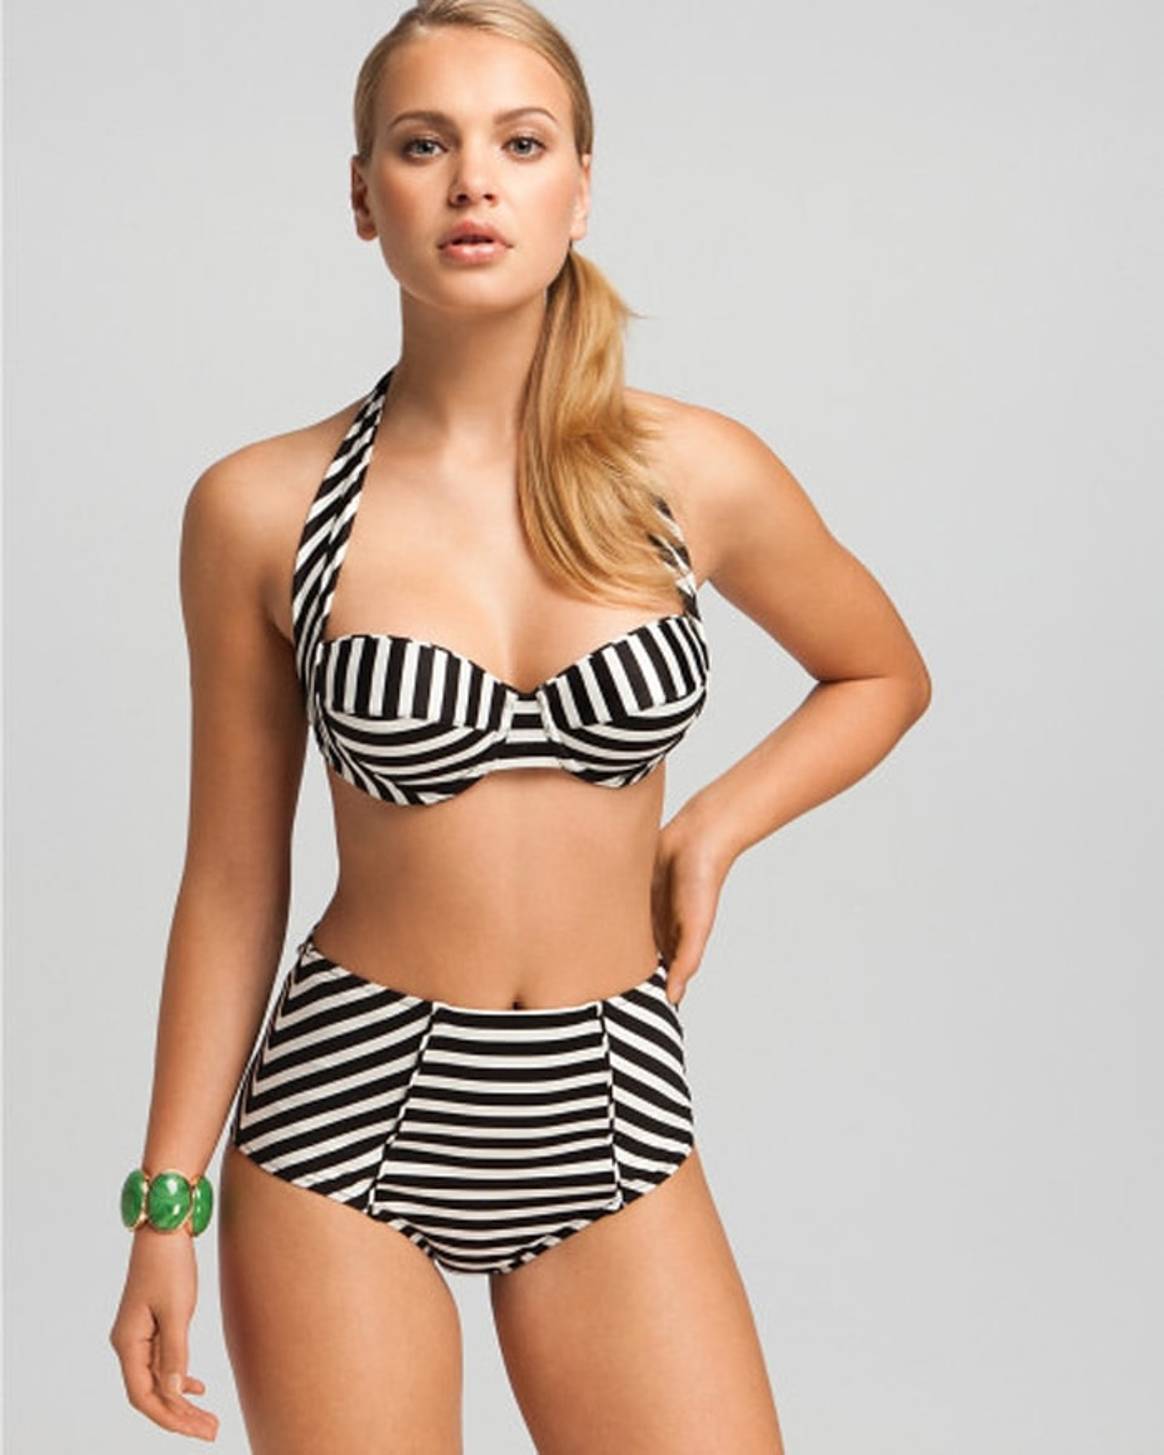 Why Monday is the most popular day to buy swimwear online